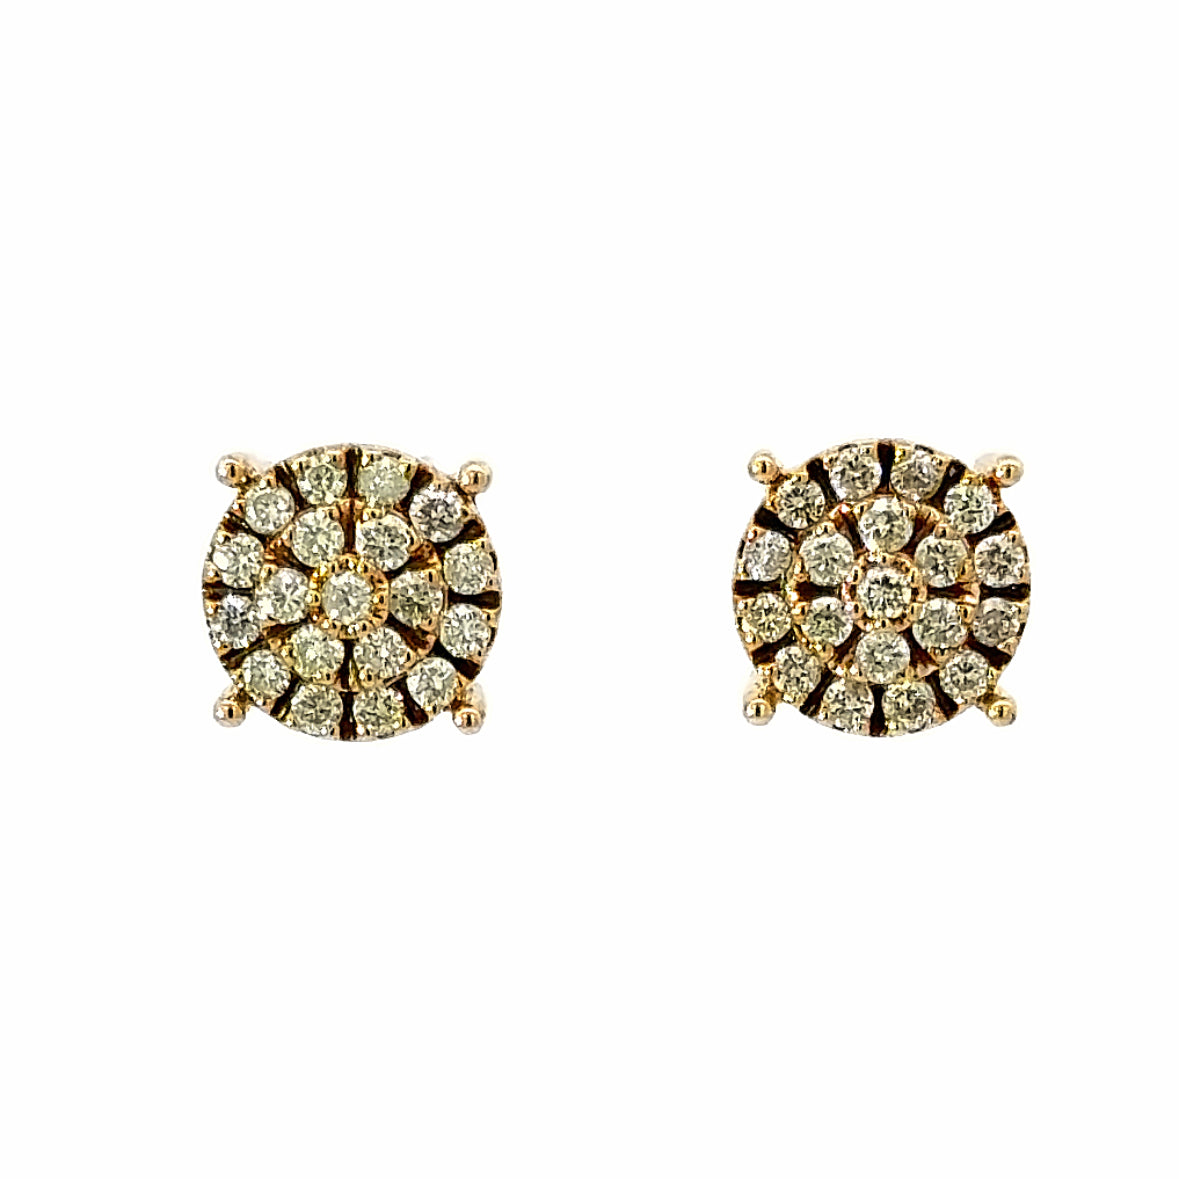 Sparkly Yellow Gold Diamond Screw-Back Earrings